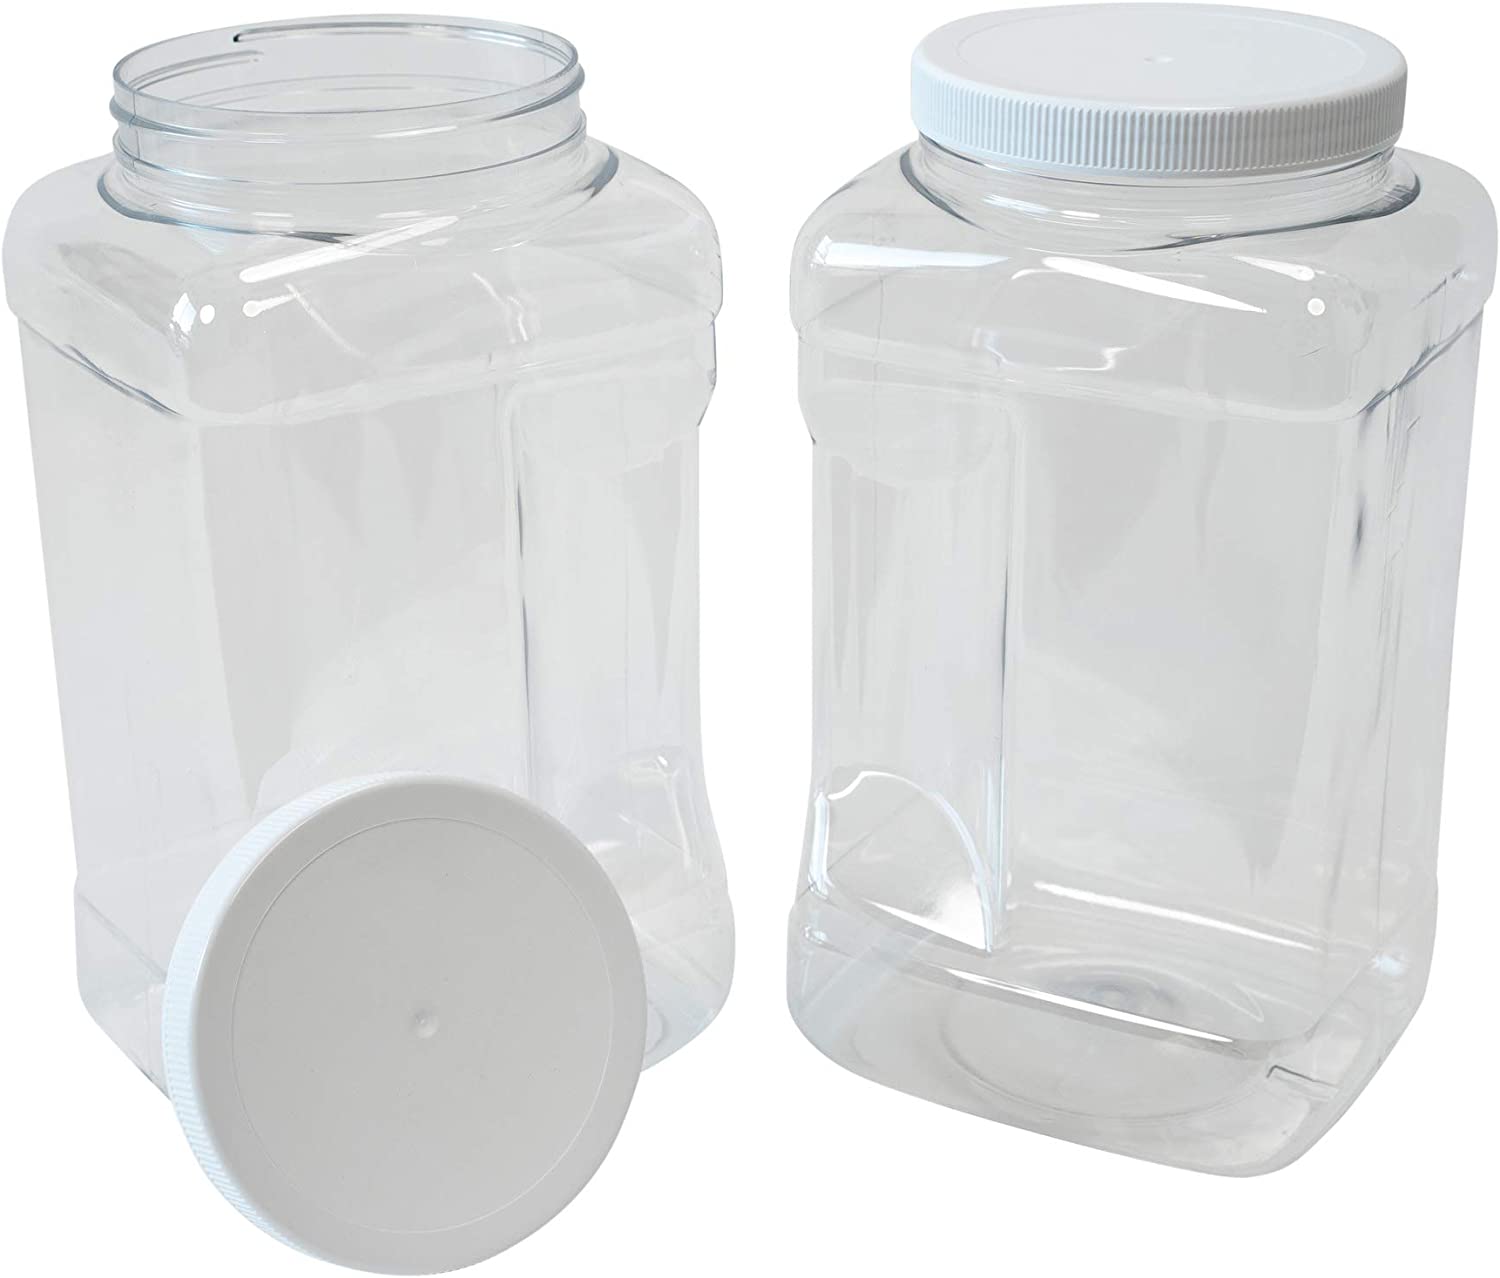 CSBD 1 Gallon Clear Plastic Jars with Ribbed Liner Screw On Lids, BPA Free, PET Plastic, Made in USA, Bulk Storage Containers 2 Pack (1 Gallon (Square))